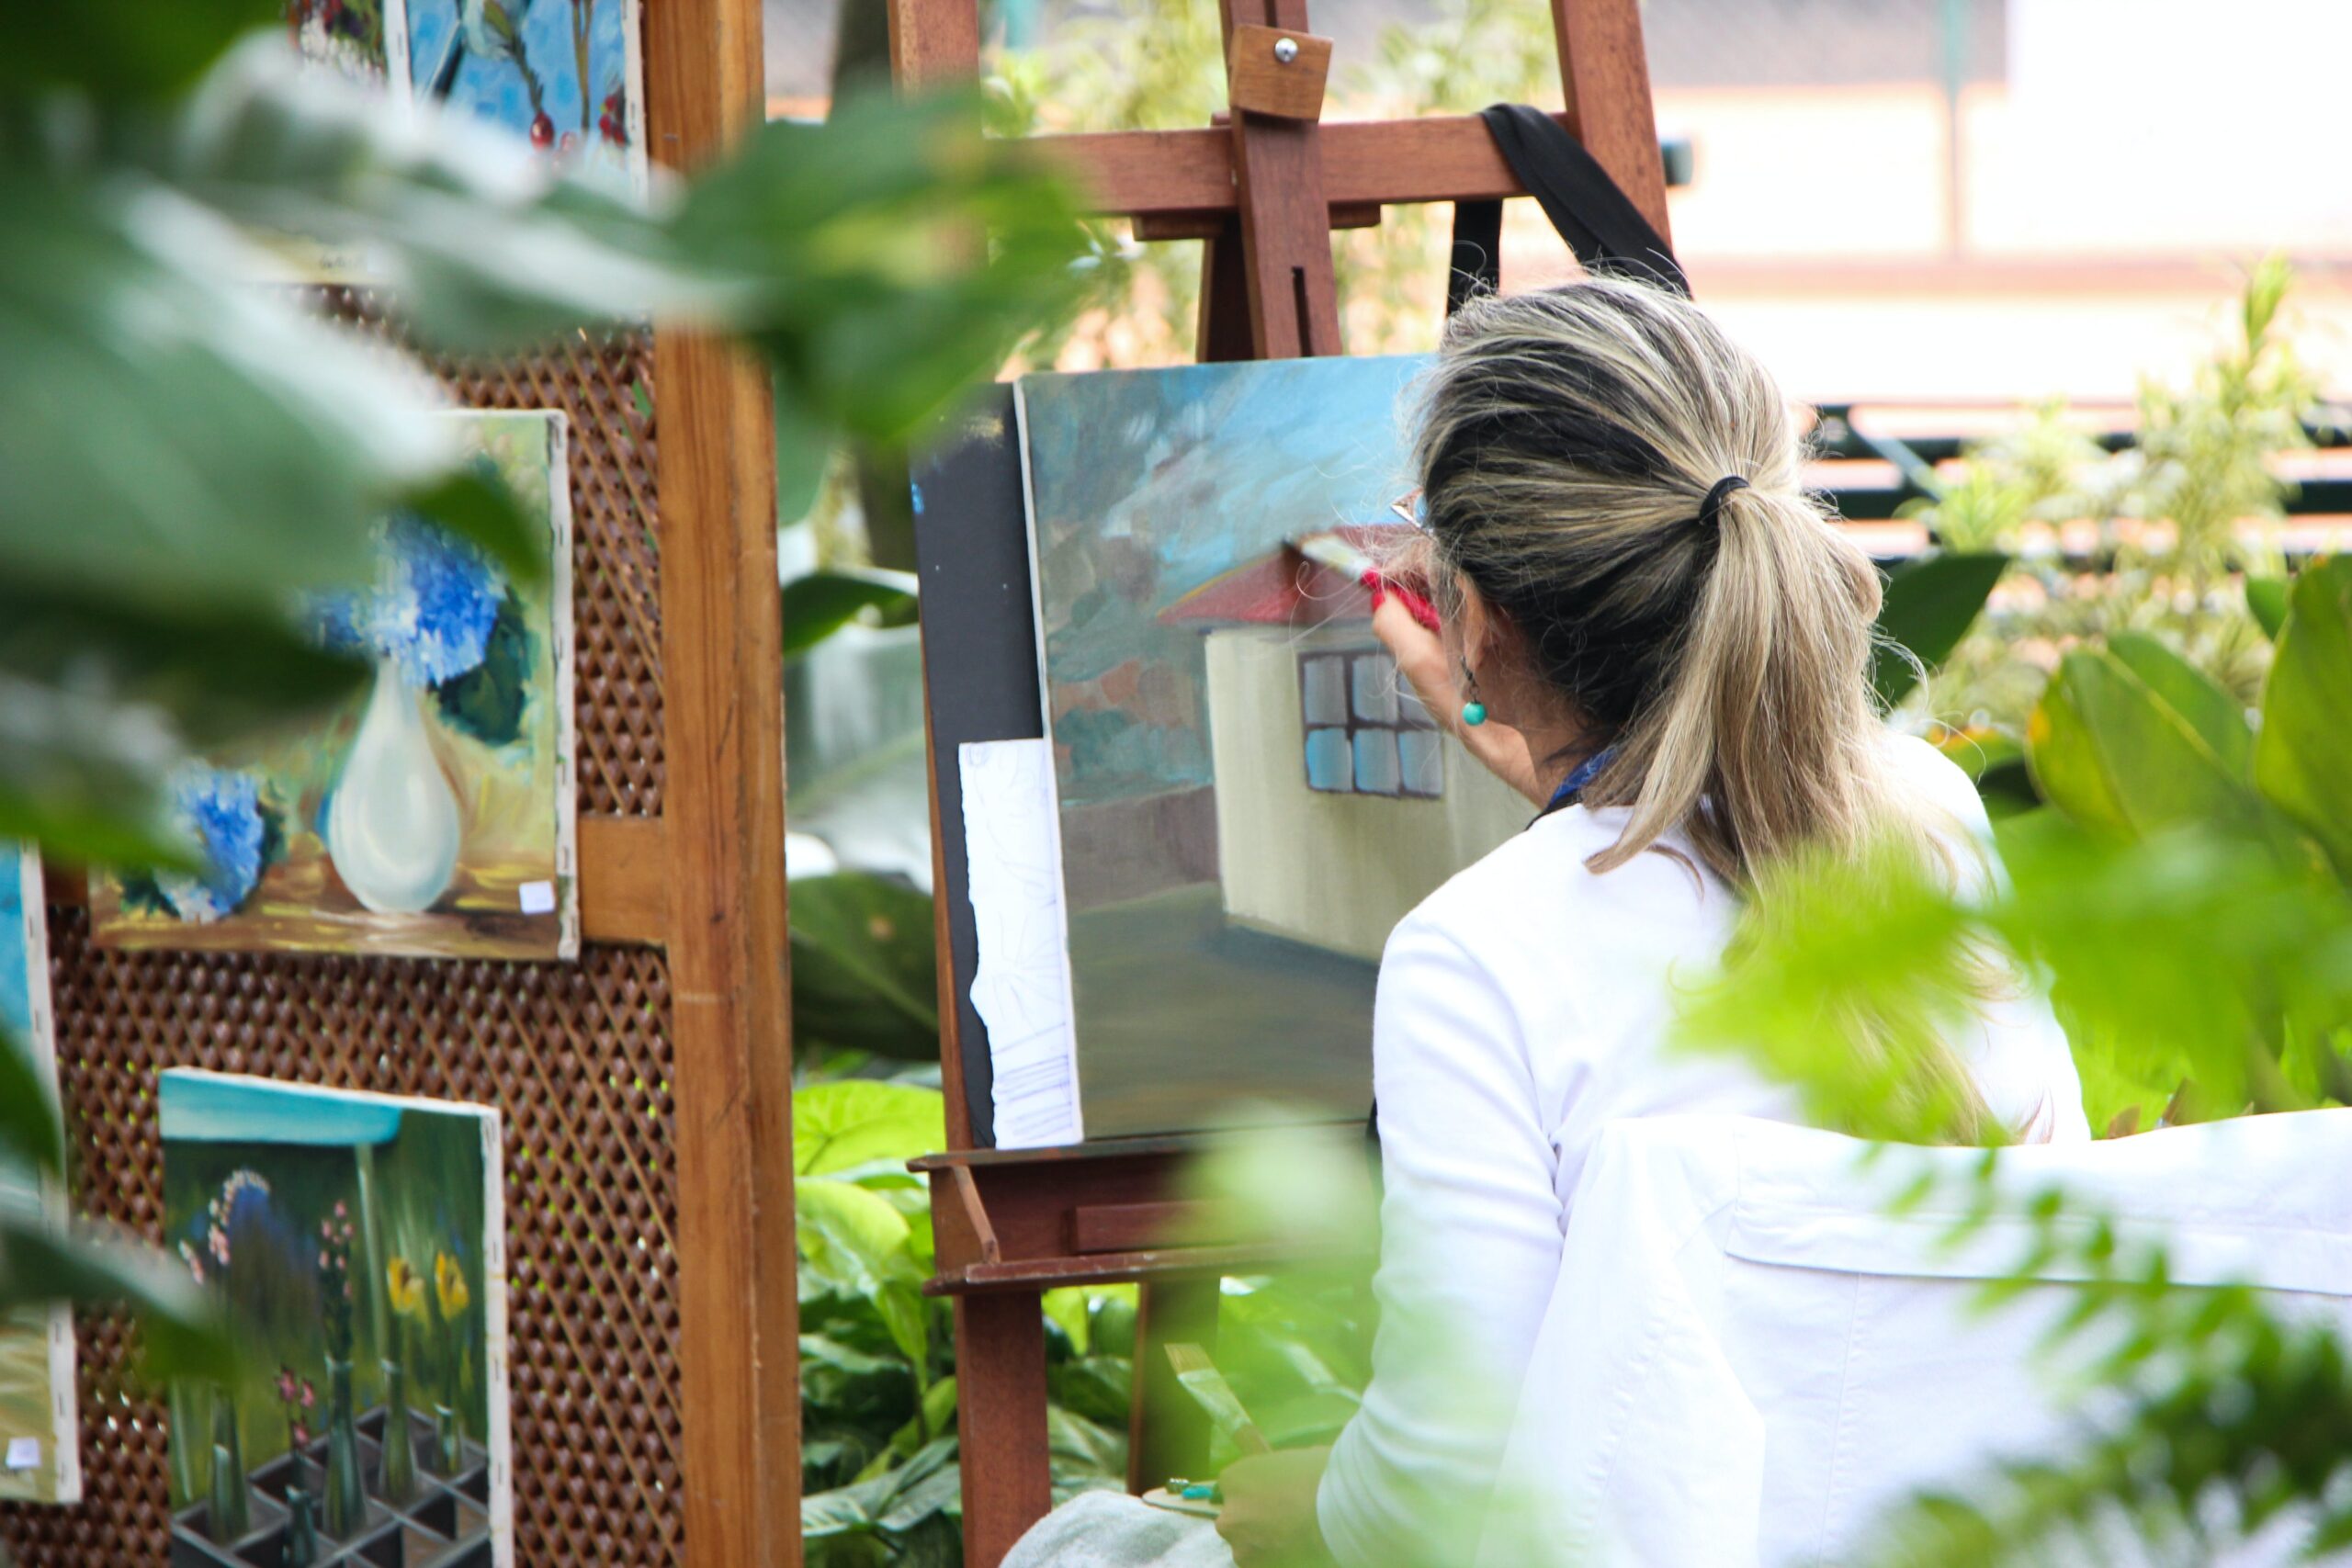 An image of a woman painting a canvas, using creative expression as therapy